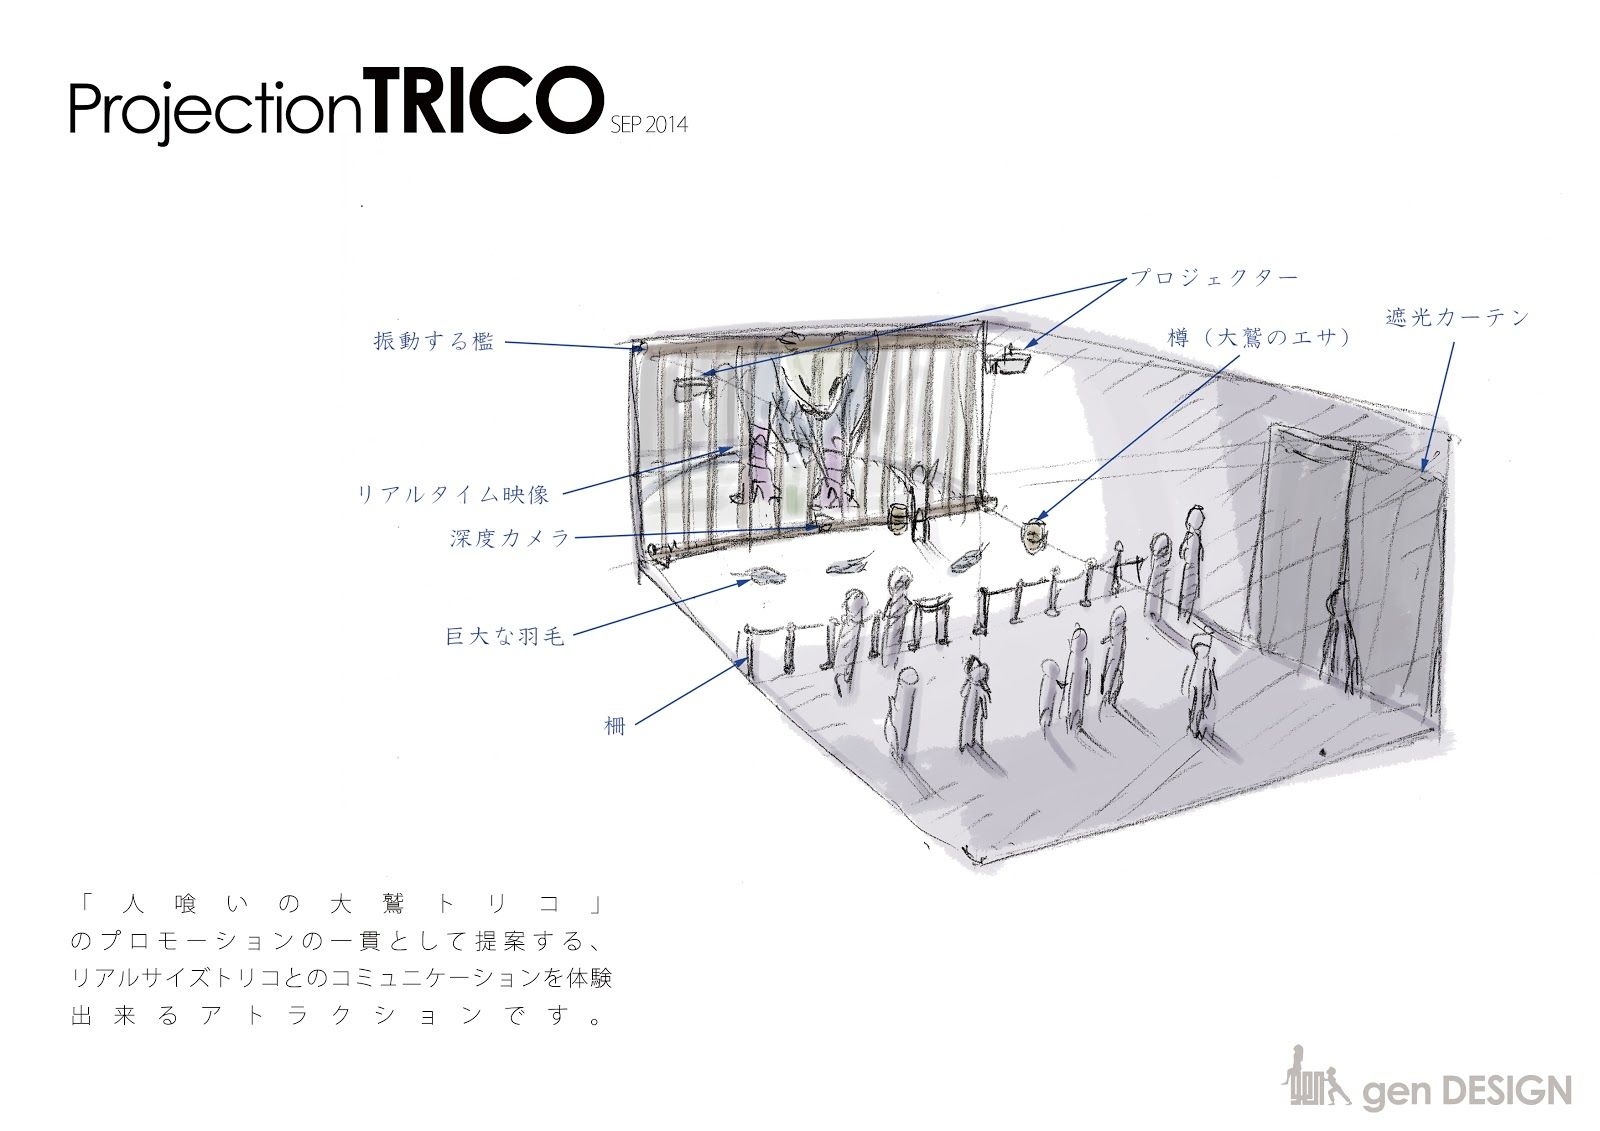 A plan for Projection Trico. Includes an illustration by Fumito Ueda